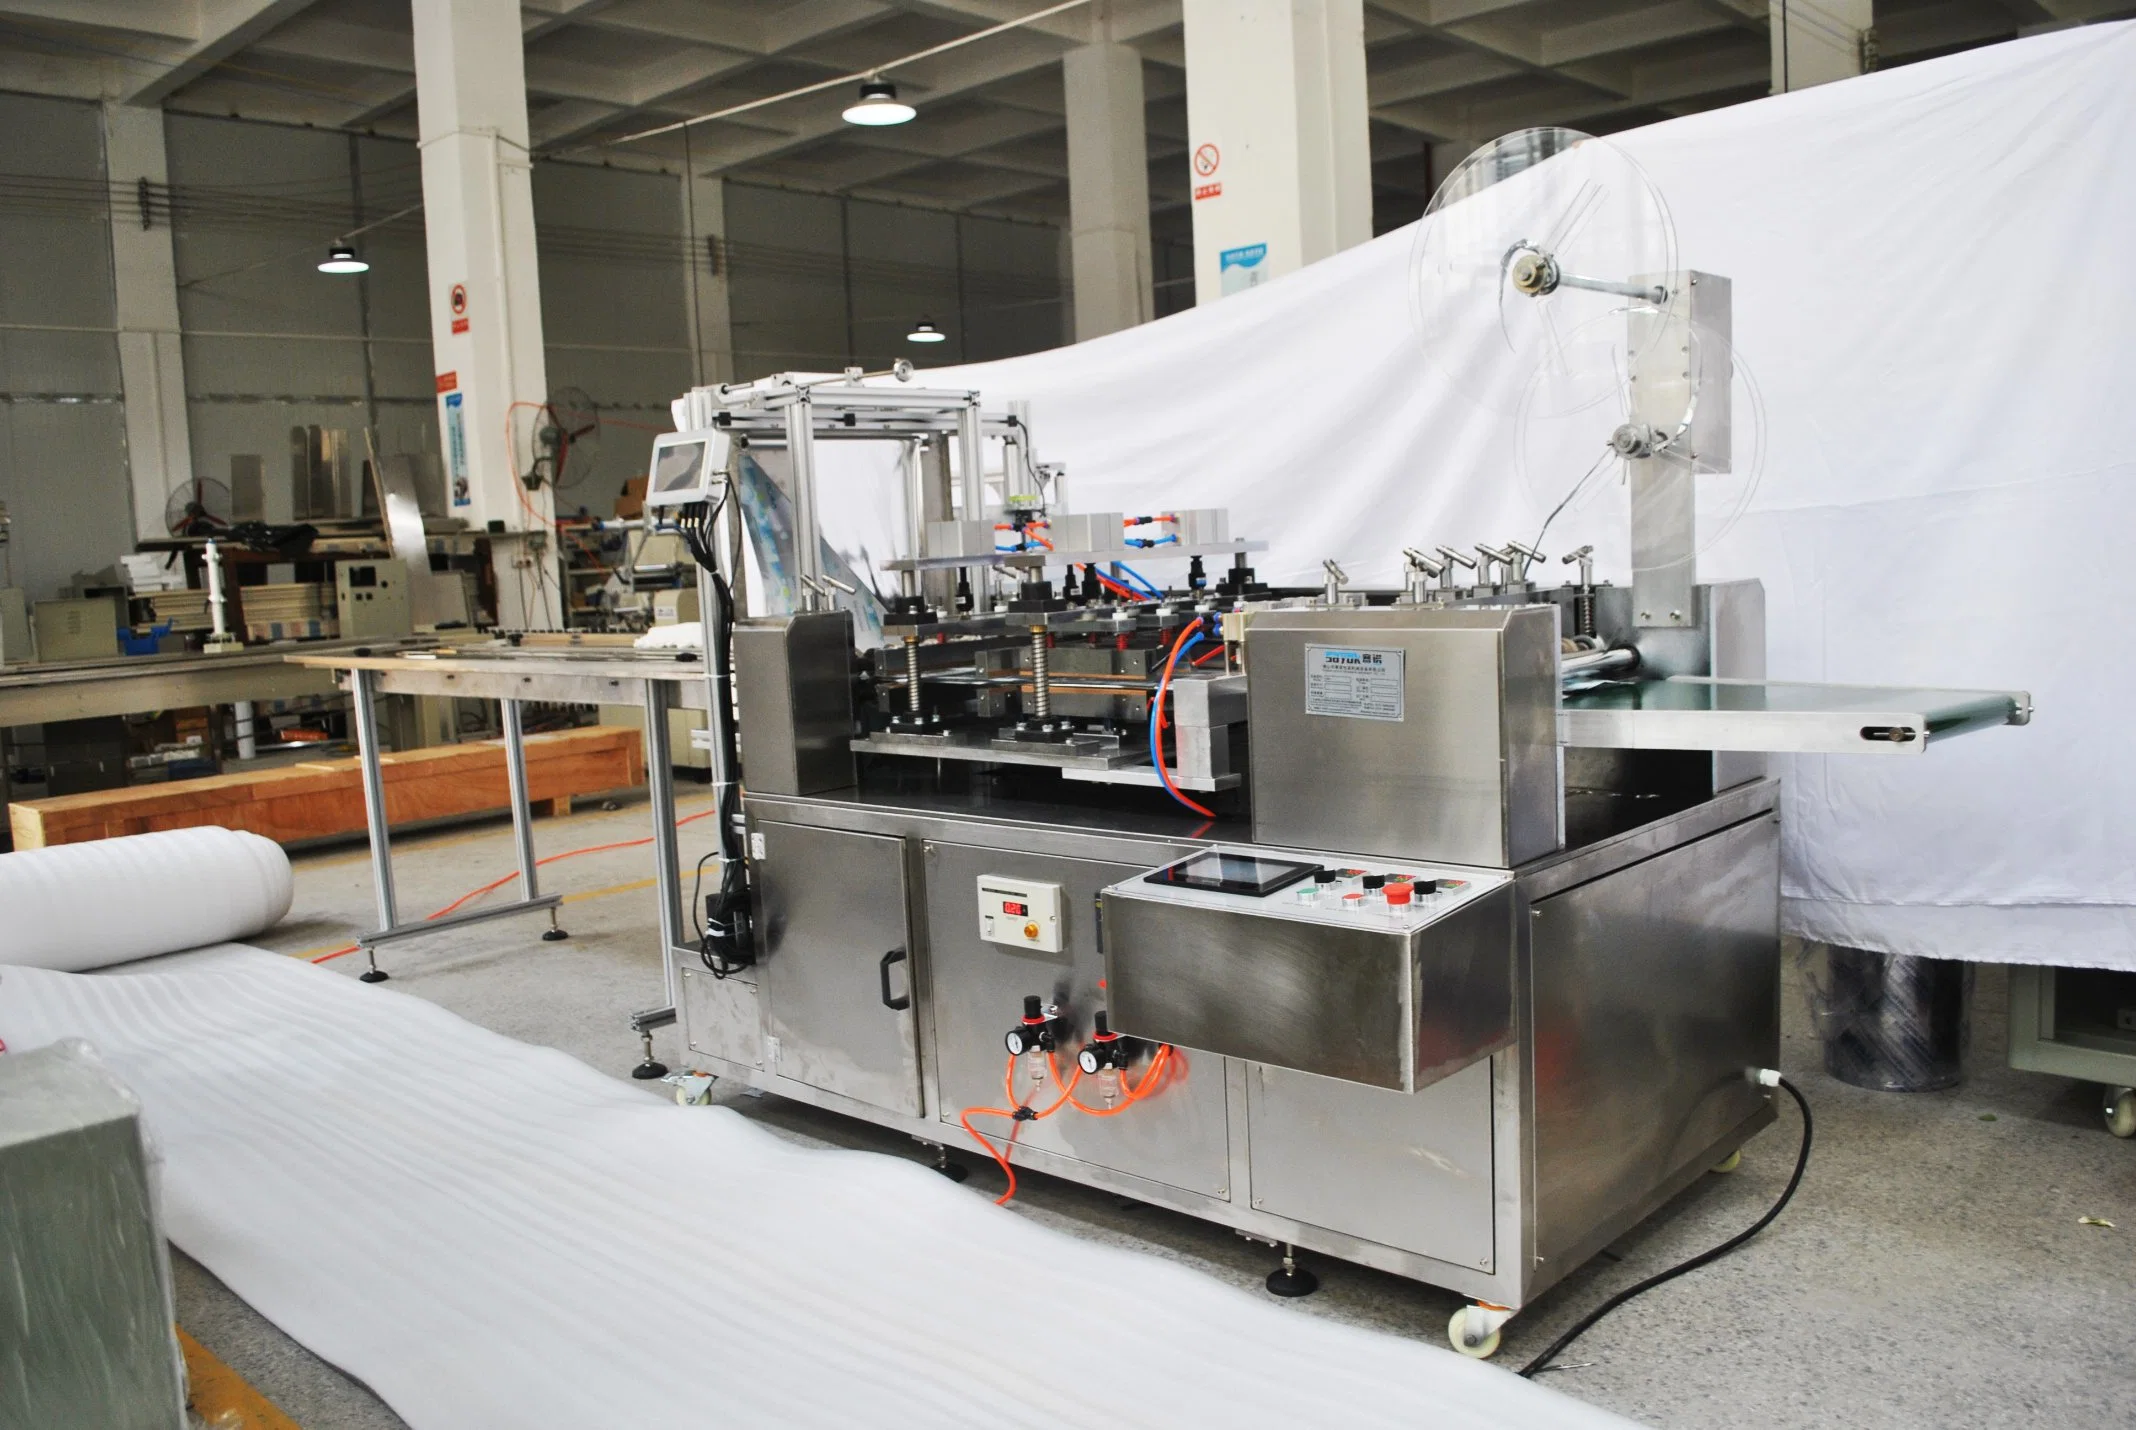 Multi Function Four Side Sealing Packaging Machine Automatic Sterile Medical Glove Packing Machine